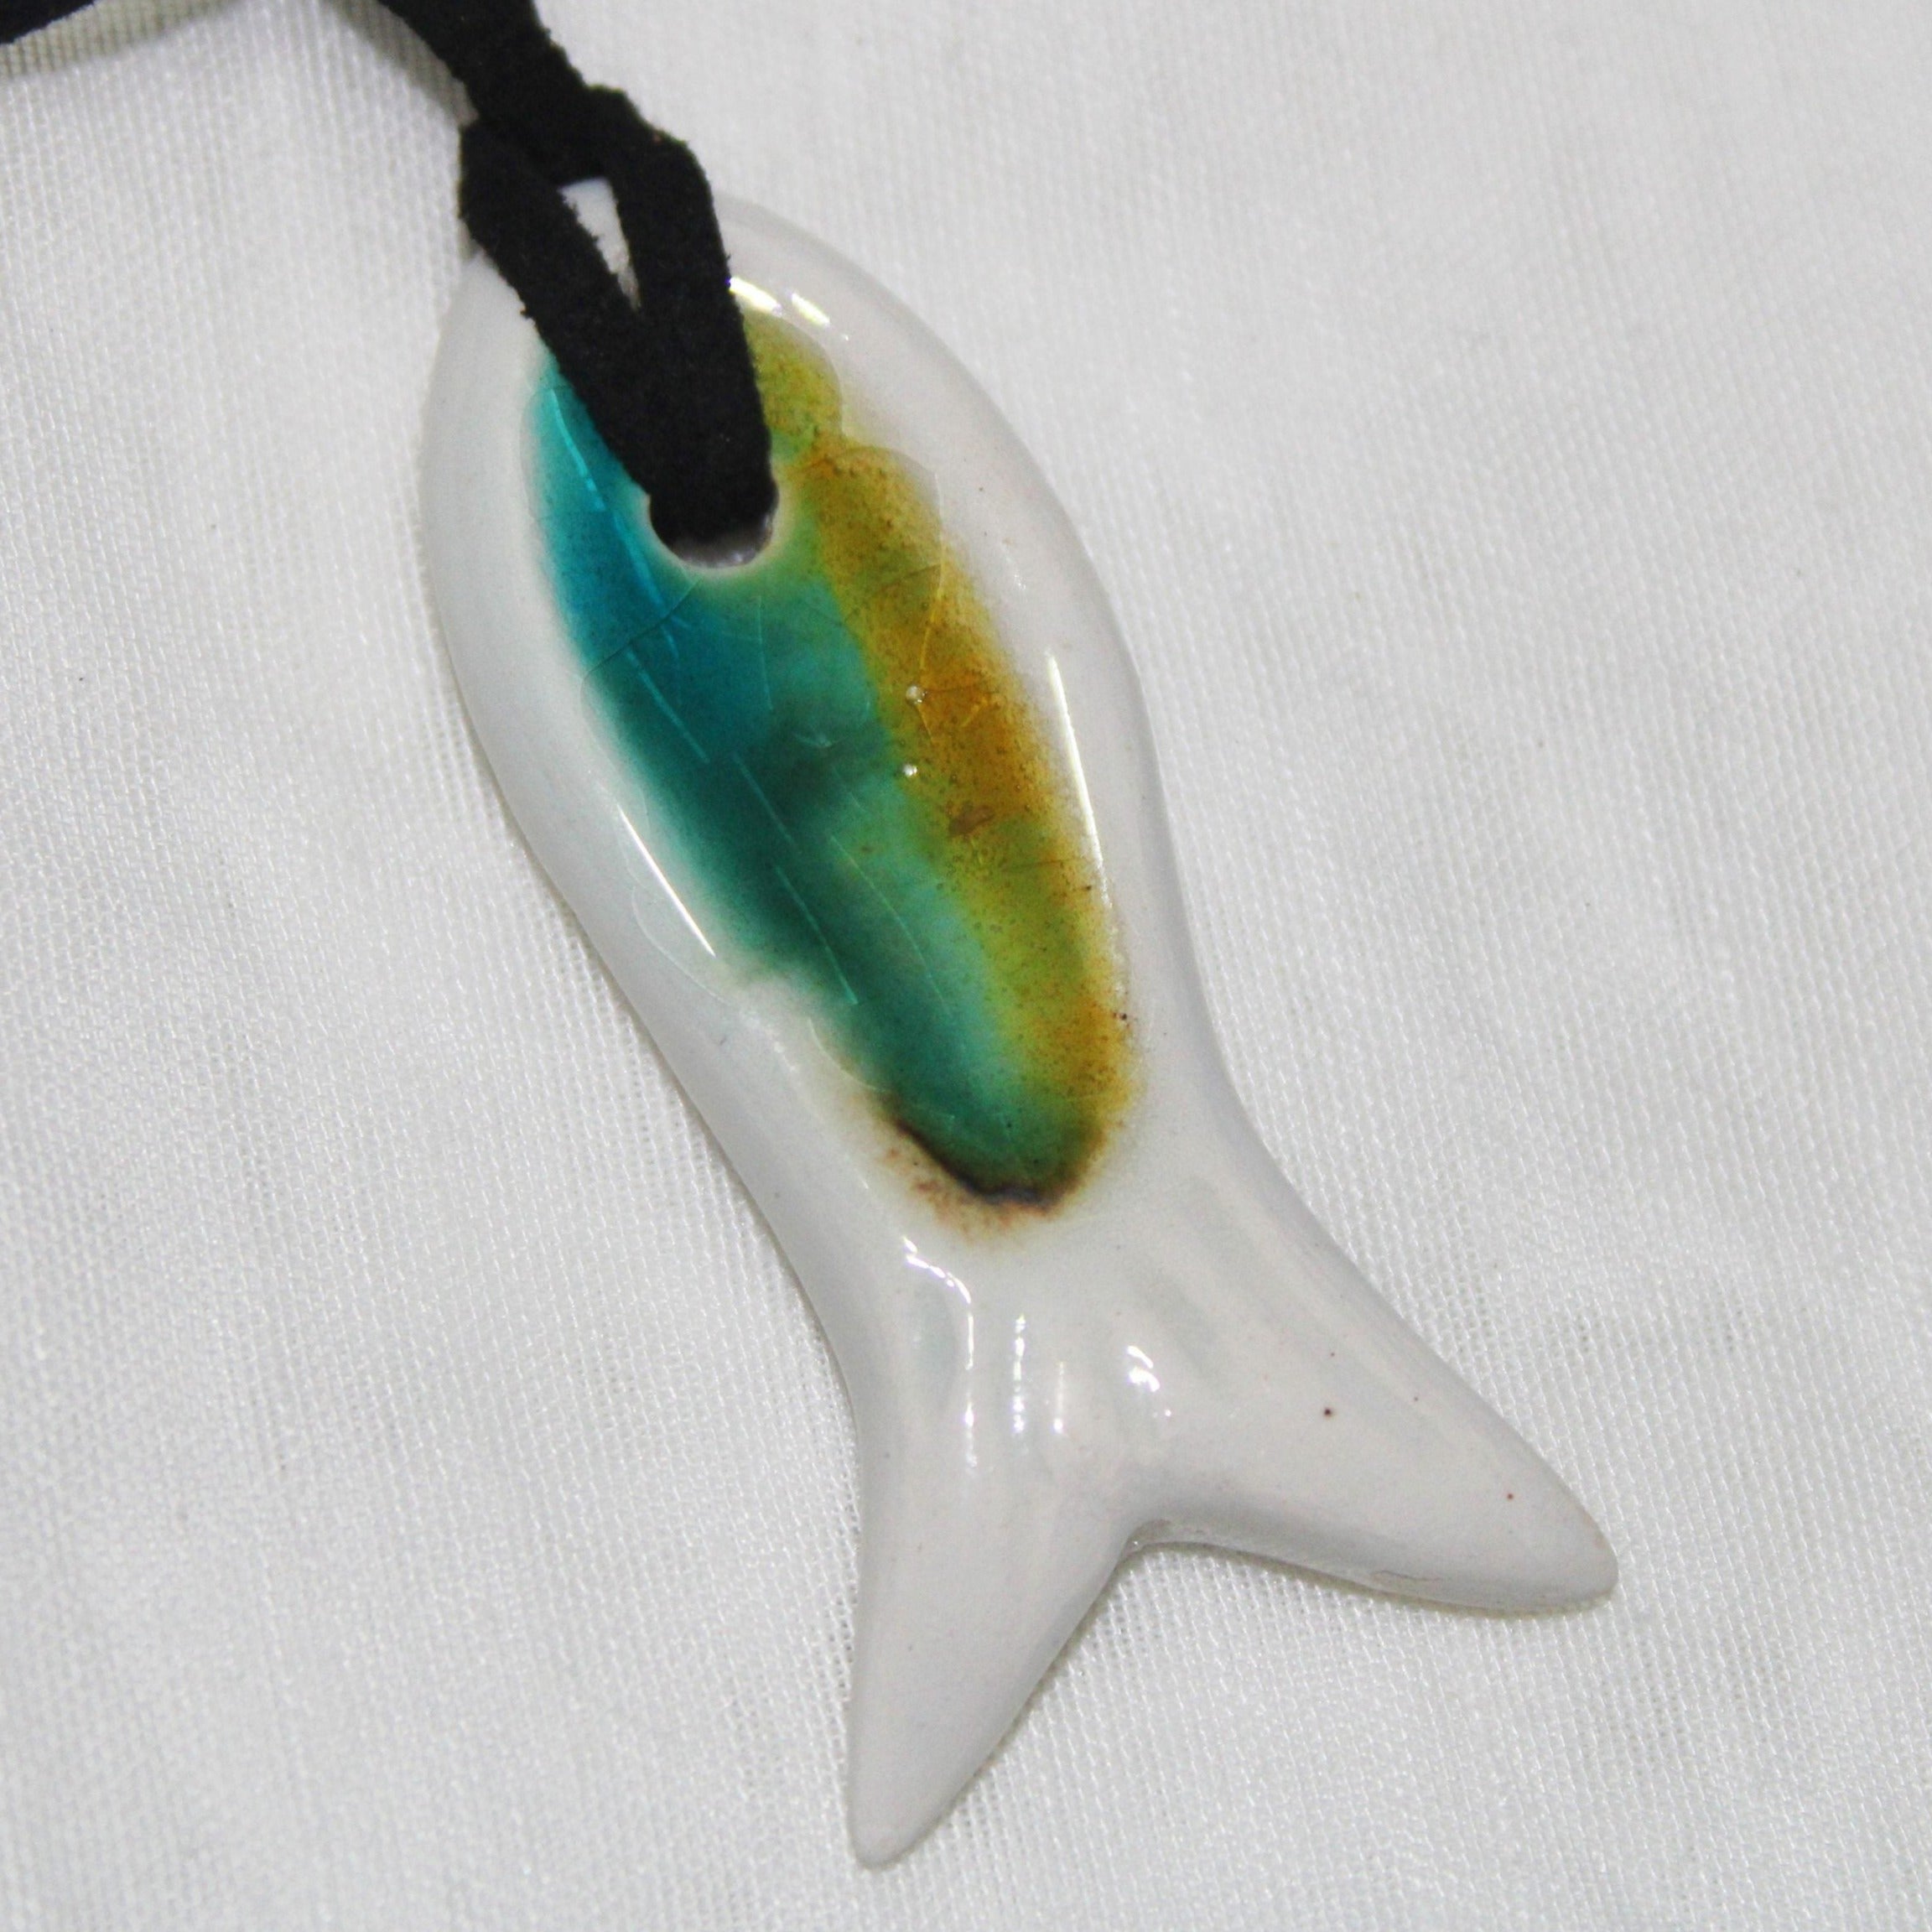 Ceramic and leather fish necklaces, 3 handmade necklaces